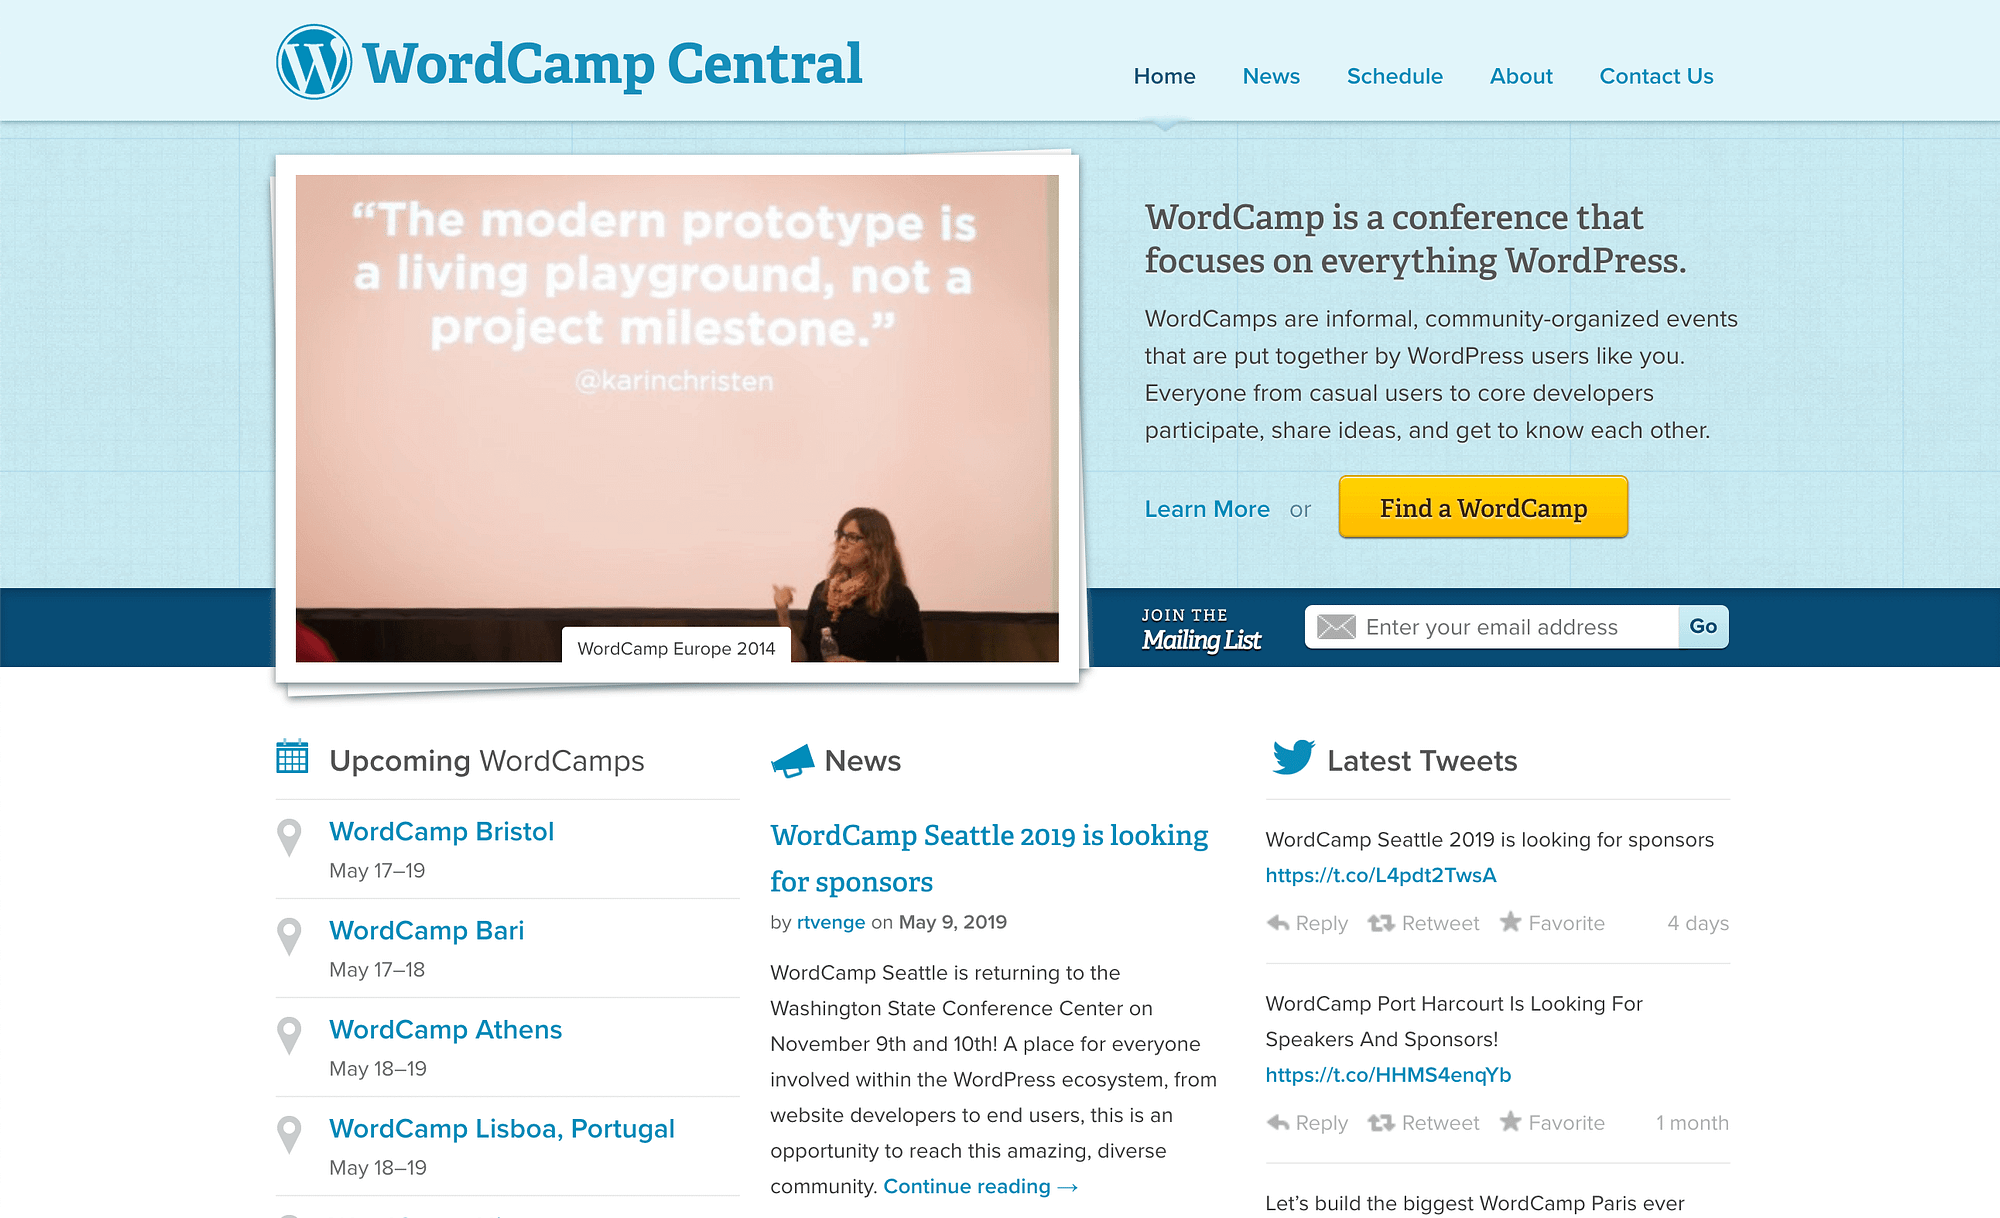 how to make money on your website with events like WordCamps